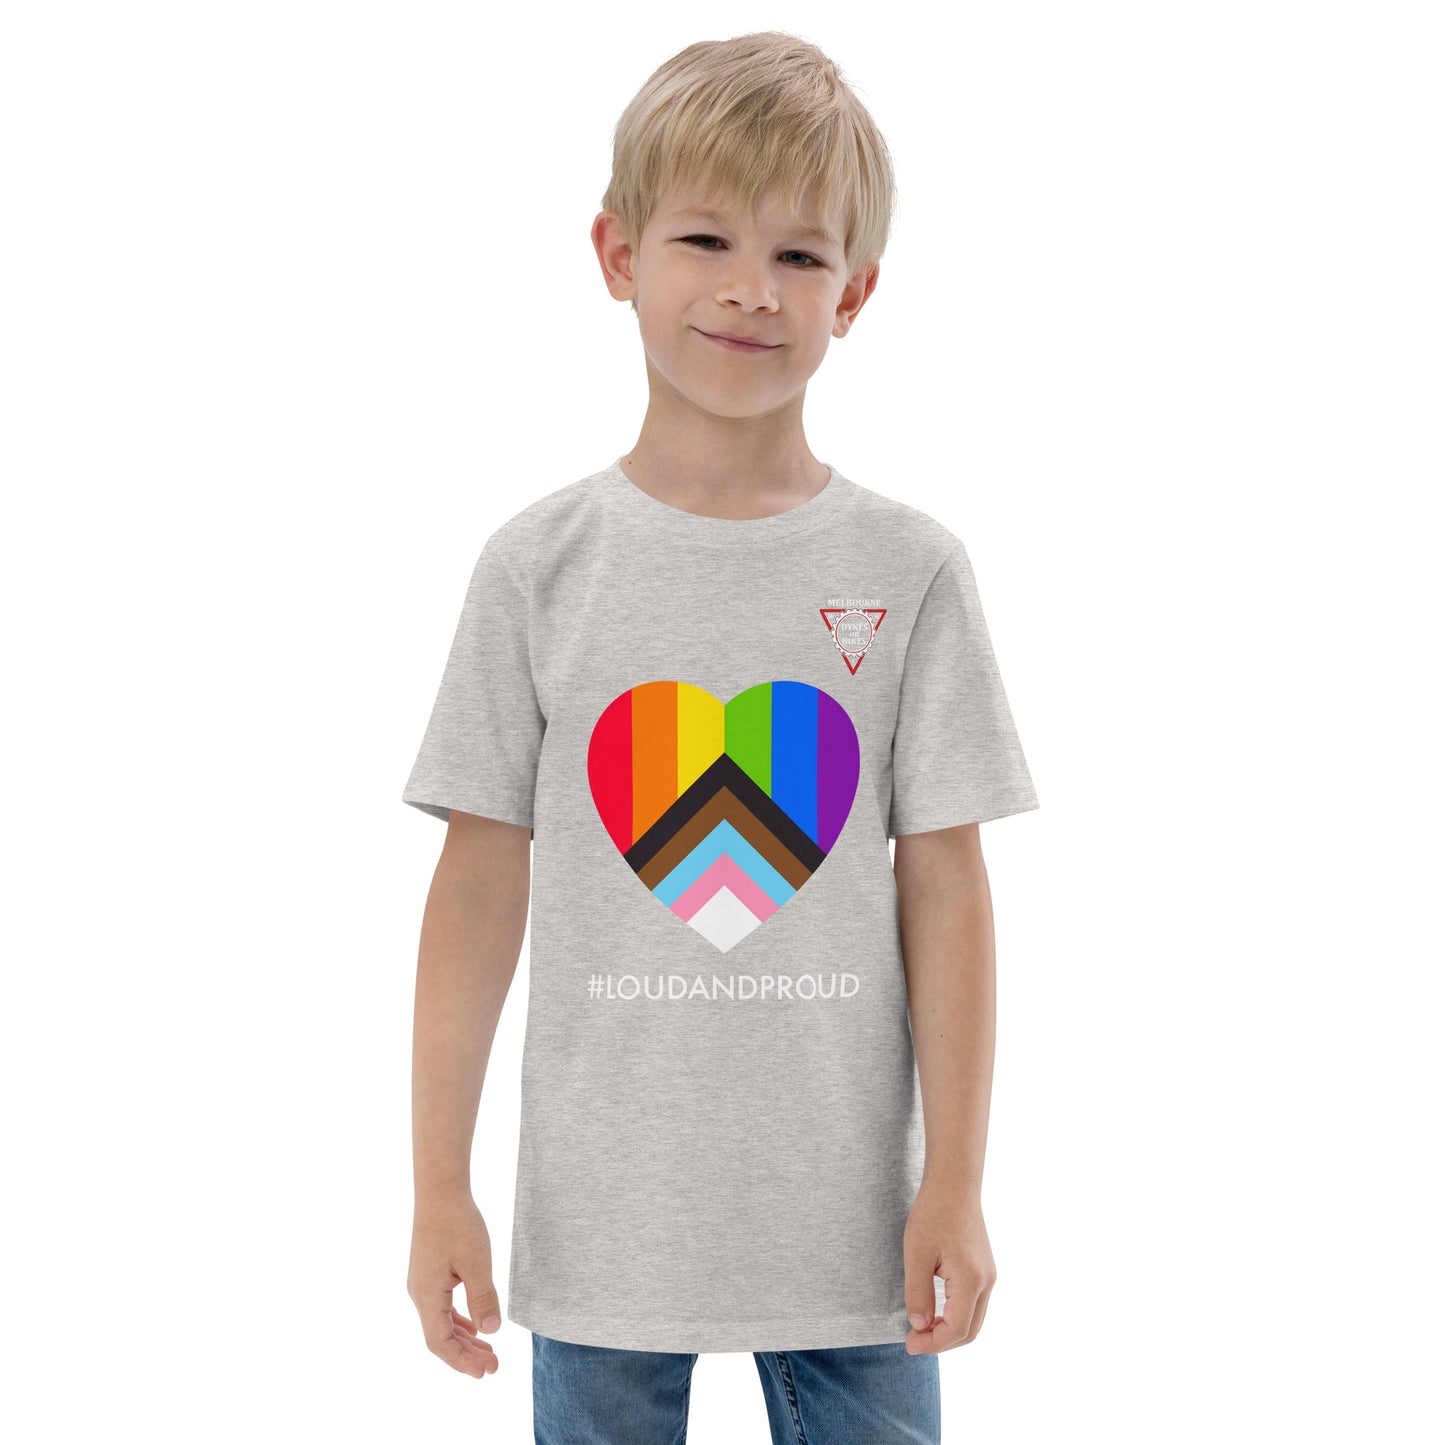 Youth jersey t-shirt - Loud and Proud Rainbow heart